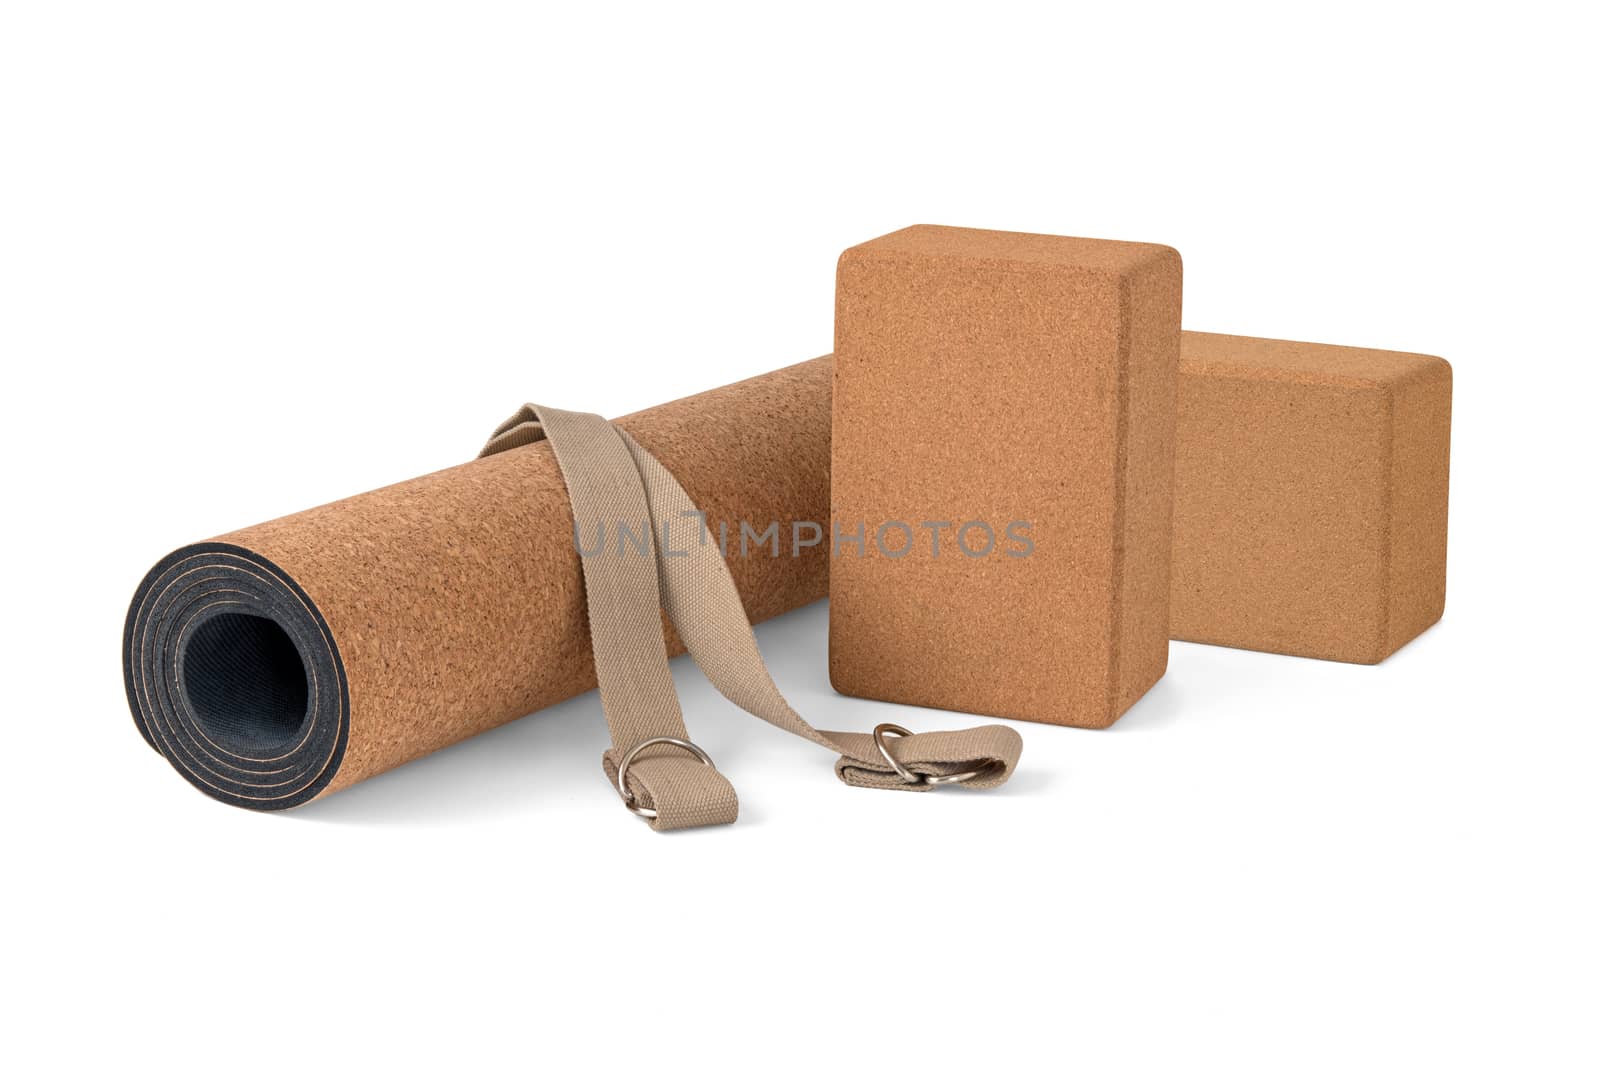 Cork Yoga Mat With Strap, Premium Eco Friendly Product on White Background